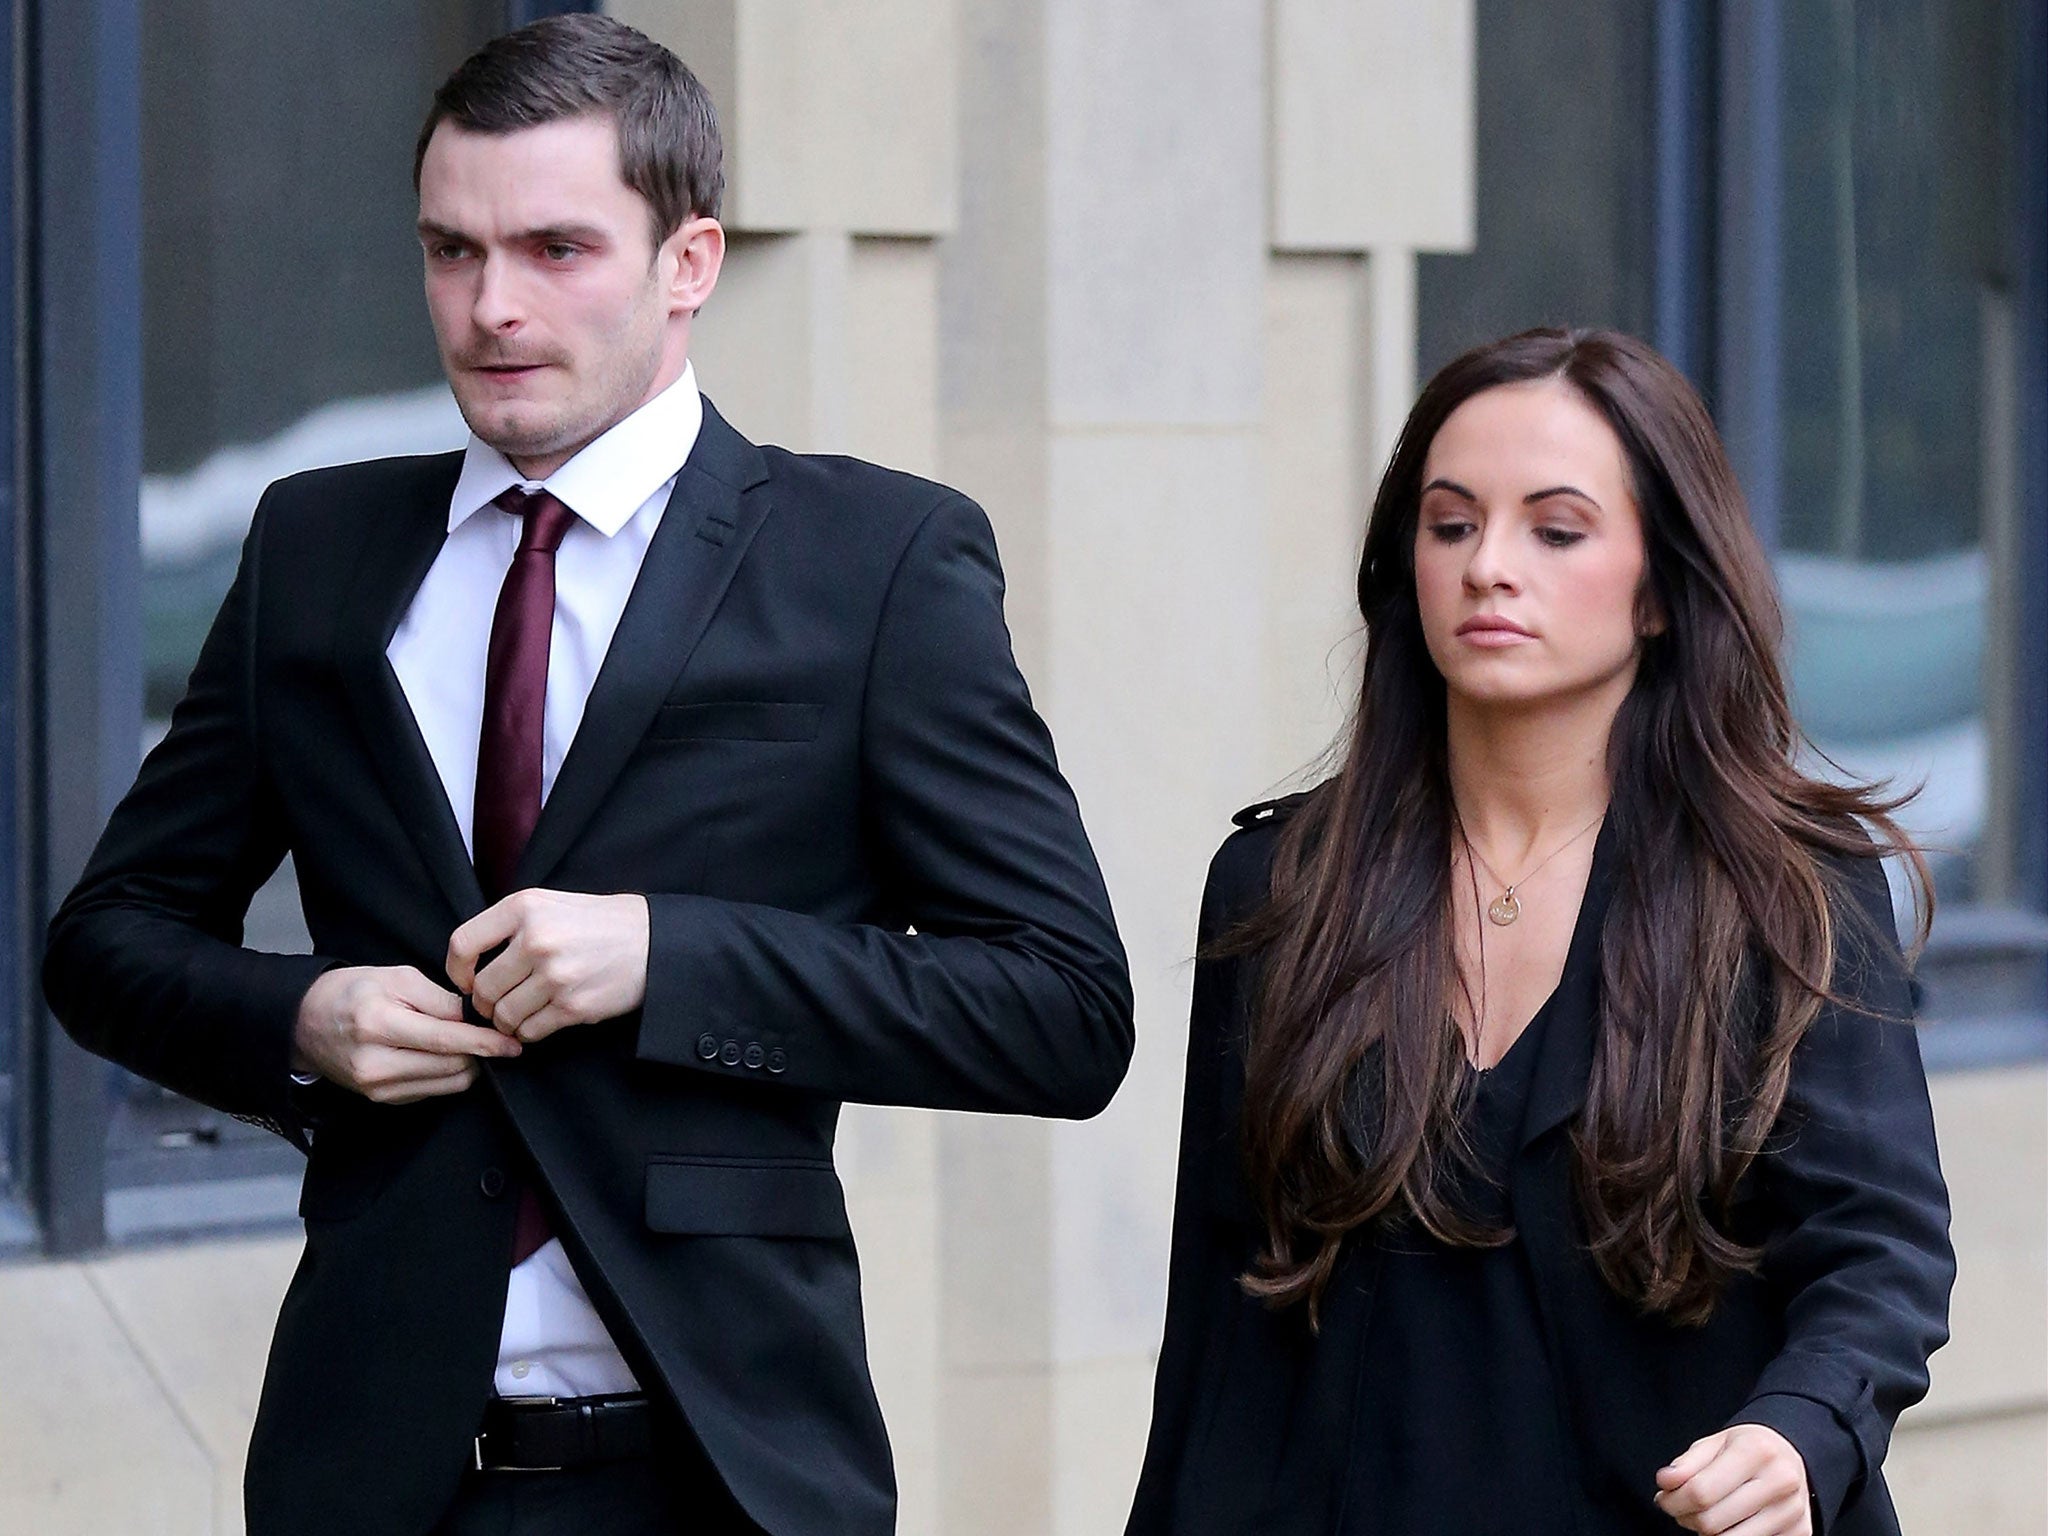 Adam Johnson and his girlfriend Stacey Flounders arrive at Bradford Crown Court on February 12, 2016